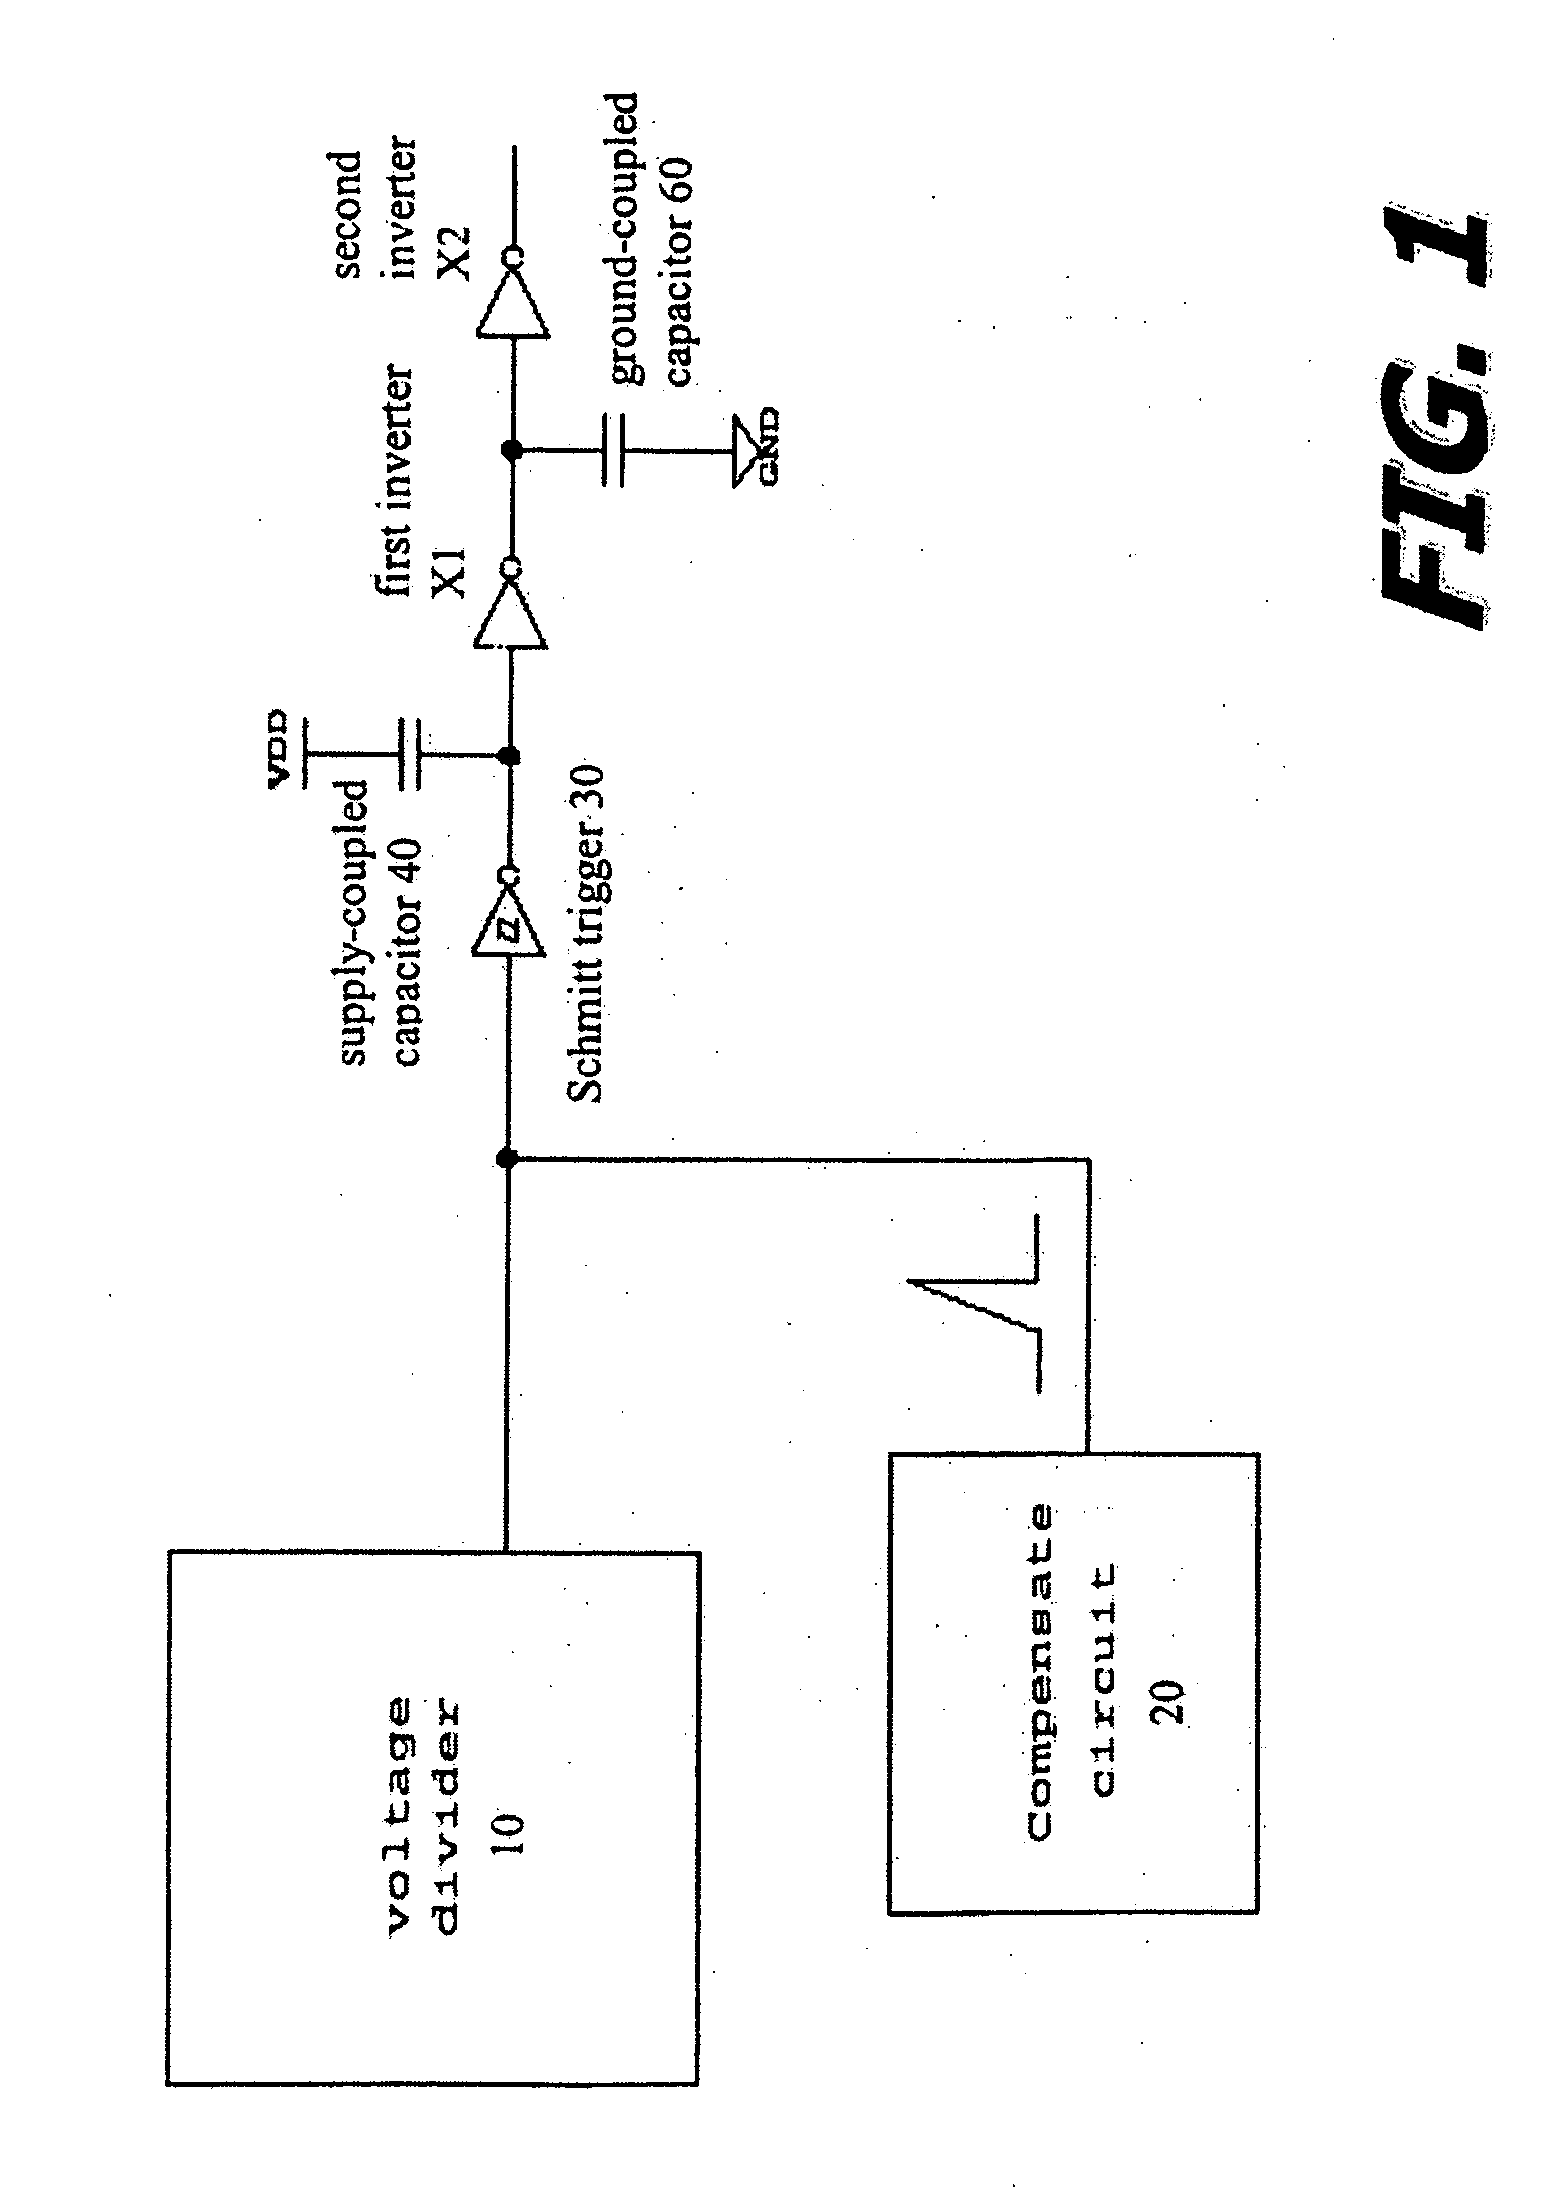 Power-on reset circuit with supply voltage and temperature immunity, ultra-low DC leakage current, and fast power crash reaction